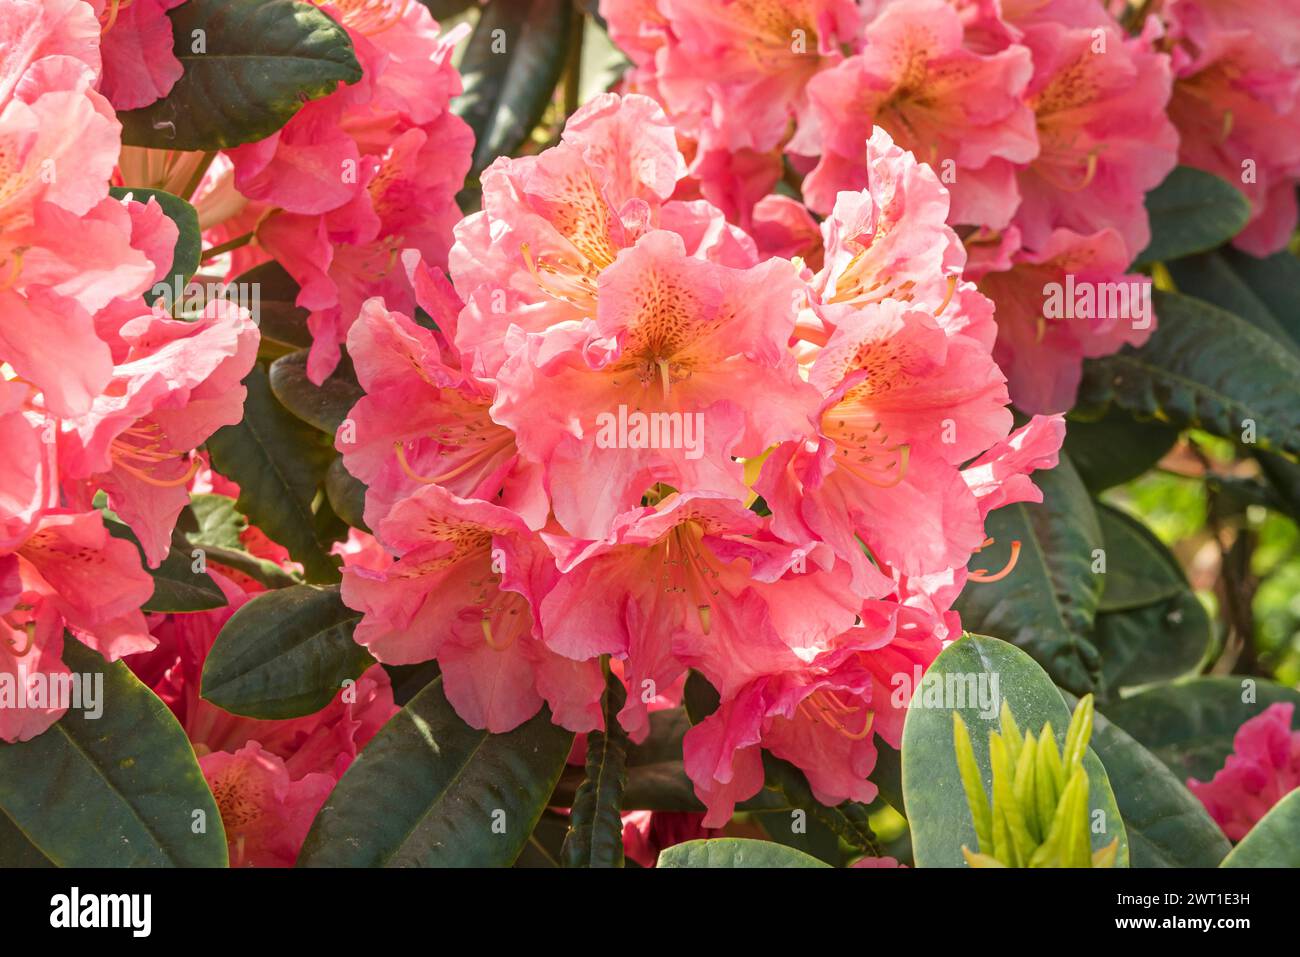 rhododendron (Rhododendron 'Dolcemente', Rhododendron Dolcemente), fioritura, cultivar Dolcemente Foto Stock